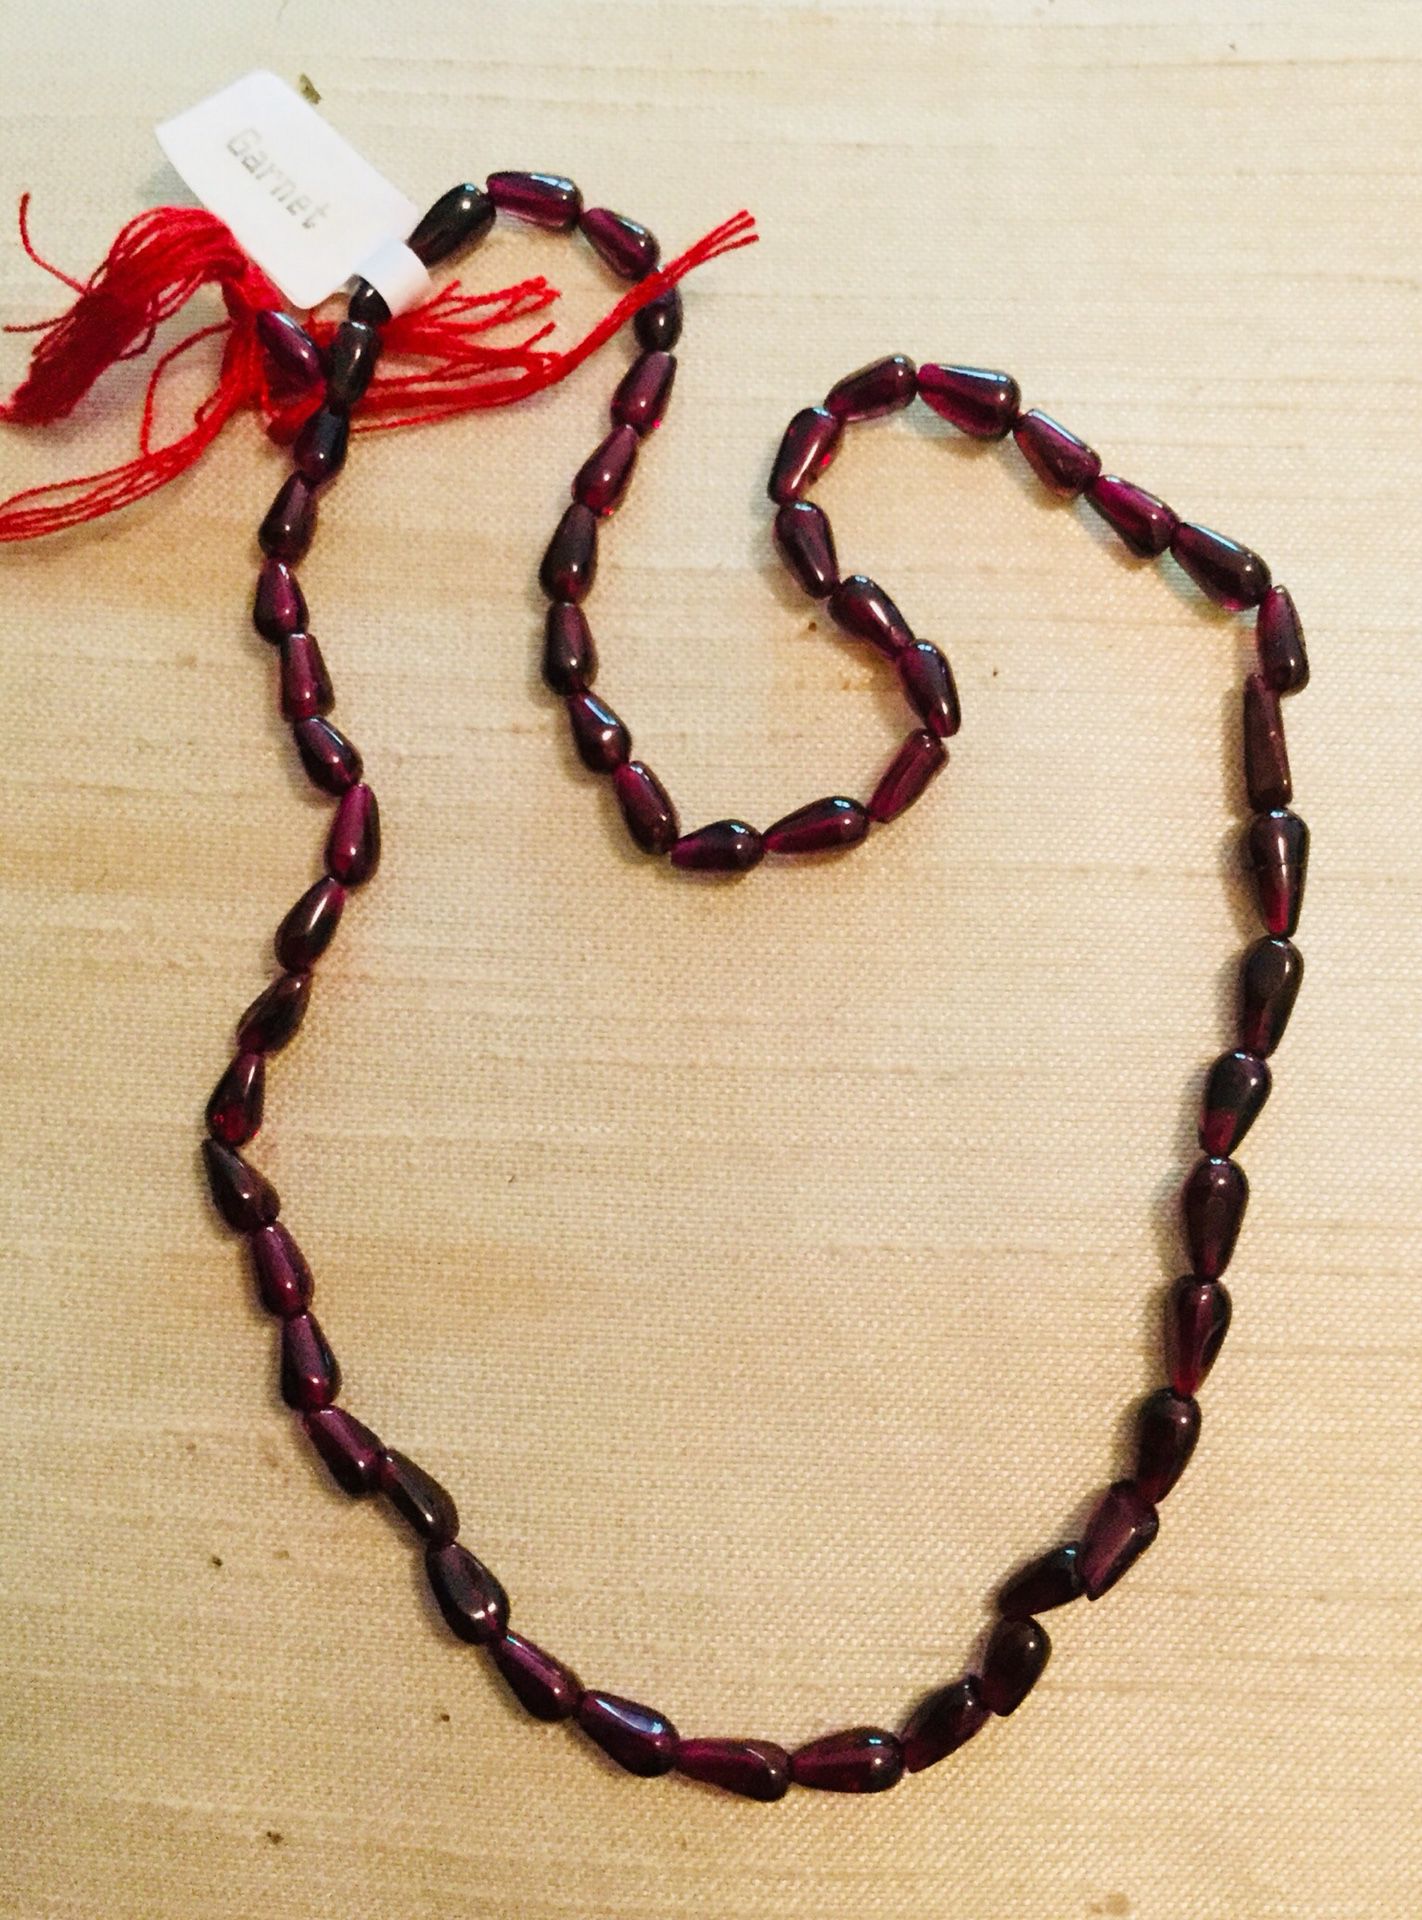 Brand new Garnet beads for Jewelry making and crafting also see my other offers